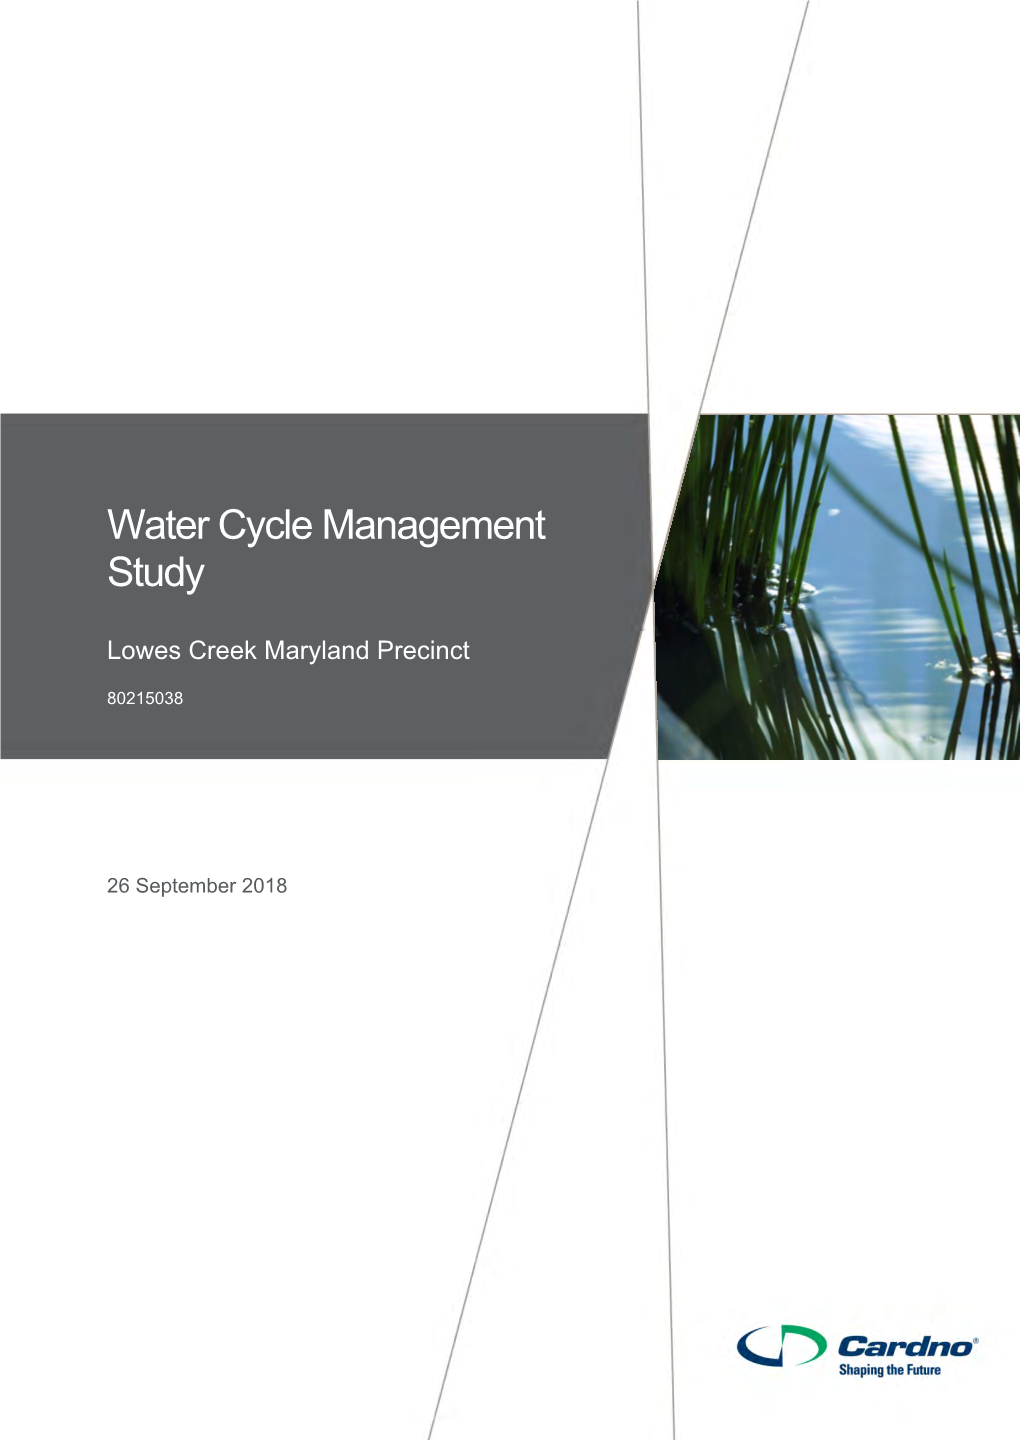 Water Cycle Management Study